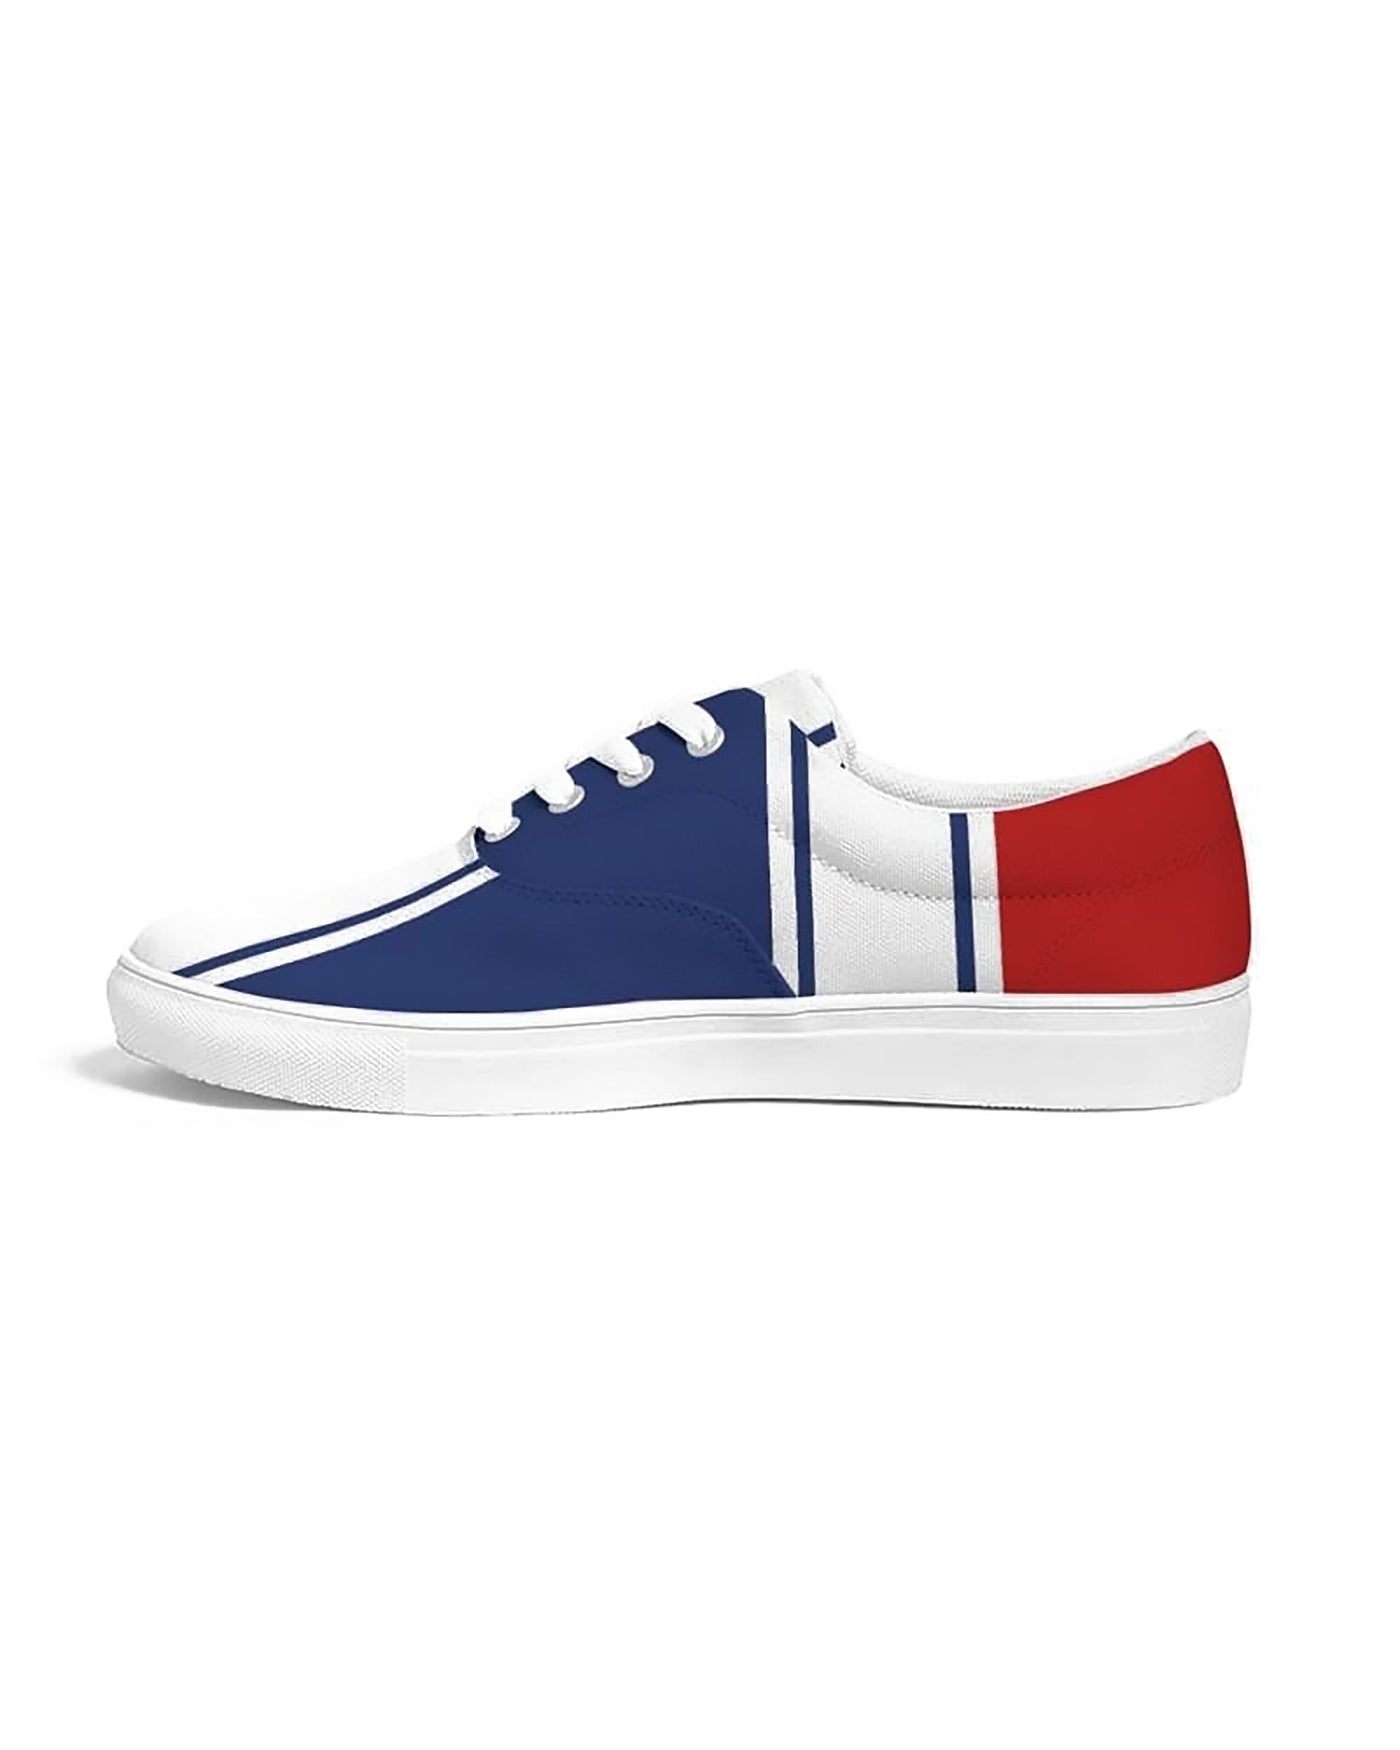 Sneakers For Men Blue Red White Striped Print - Sports Shoes - Mens | Sneakers